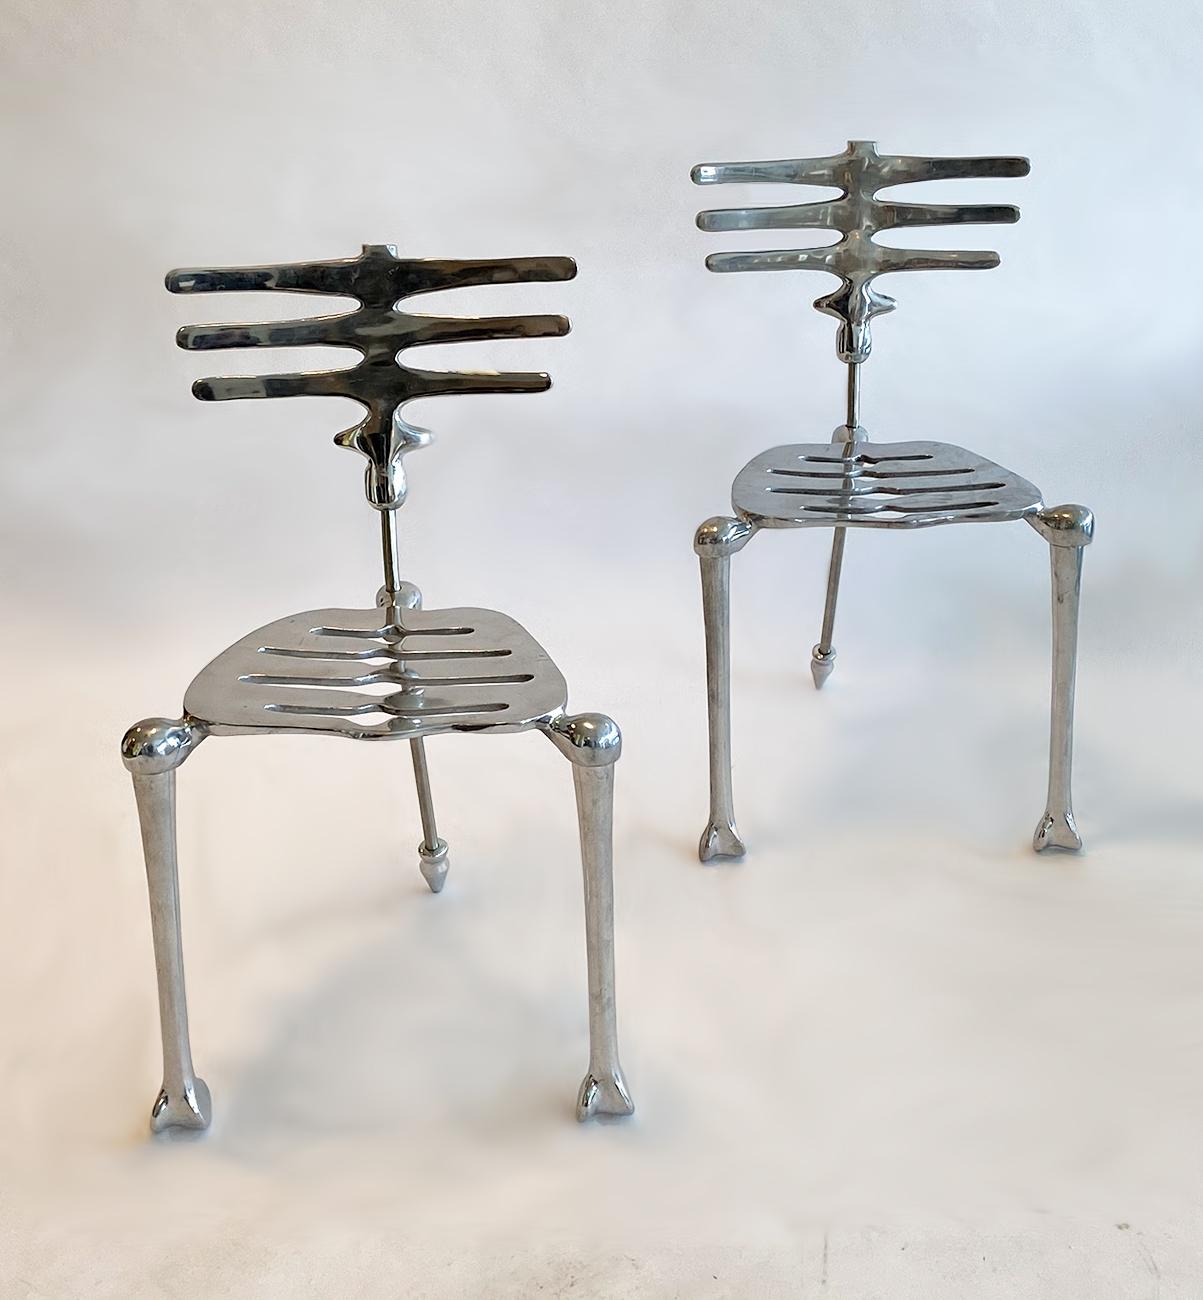 Pair of skeleton chairs by Michael Aram aluminum and stainless steel. From Aram's 'Flights of Fancy' collection.
Michael Aram Furniture is handcrafted, with no two pieces ever alike. Each piece in this collection undergoes a series of casting,